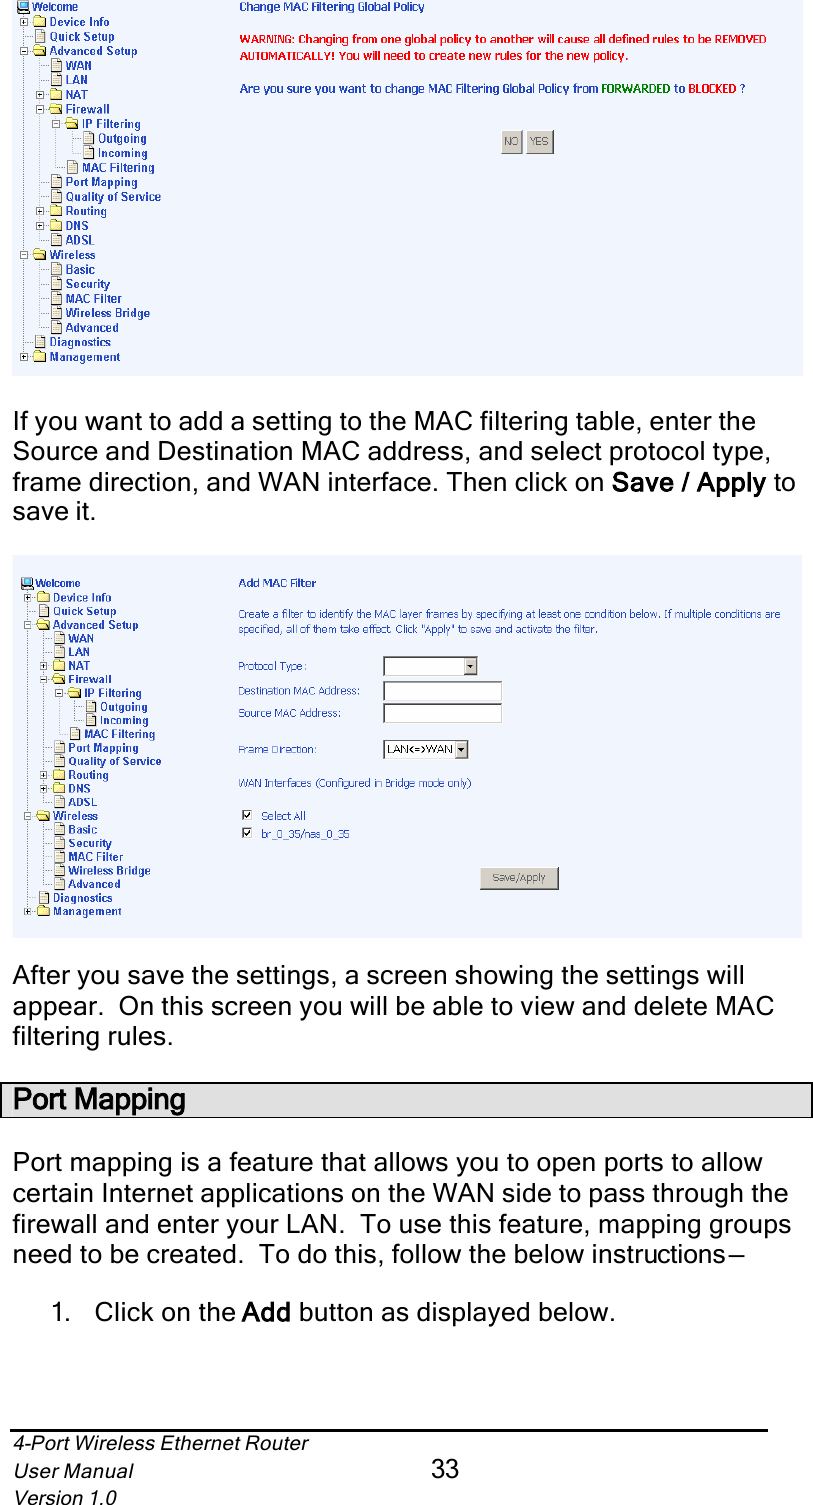 4-Port Wireless Ethernet RouterUser Manual33Version 1.0If you want to add a setting to the MAC filtering table, enter the Source and Destination MAC address, and select protocol type, frame direction, and WAN interface. Then click on Save / Apply  tosave it. After you save the settings, a screen showing the settings will appear.  On this screen you will be able to view and delete MAC filtering rules. Port MappingPort mapping is a feature that allows you to open ports to allow certain Internet applications on the WAN side to pass through the firewall and enter your LAN.  To use this feature, mapping groups need to be created.  To do this, follow the below instructions—1.  Click on the Addd button as displayed below.